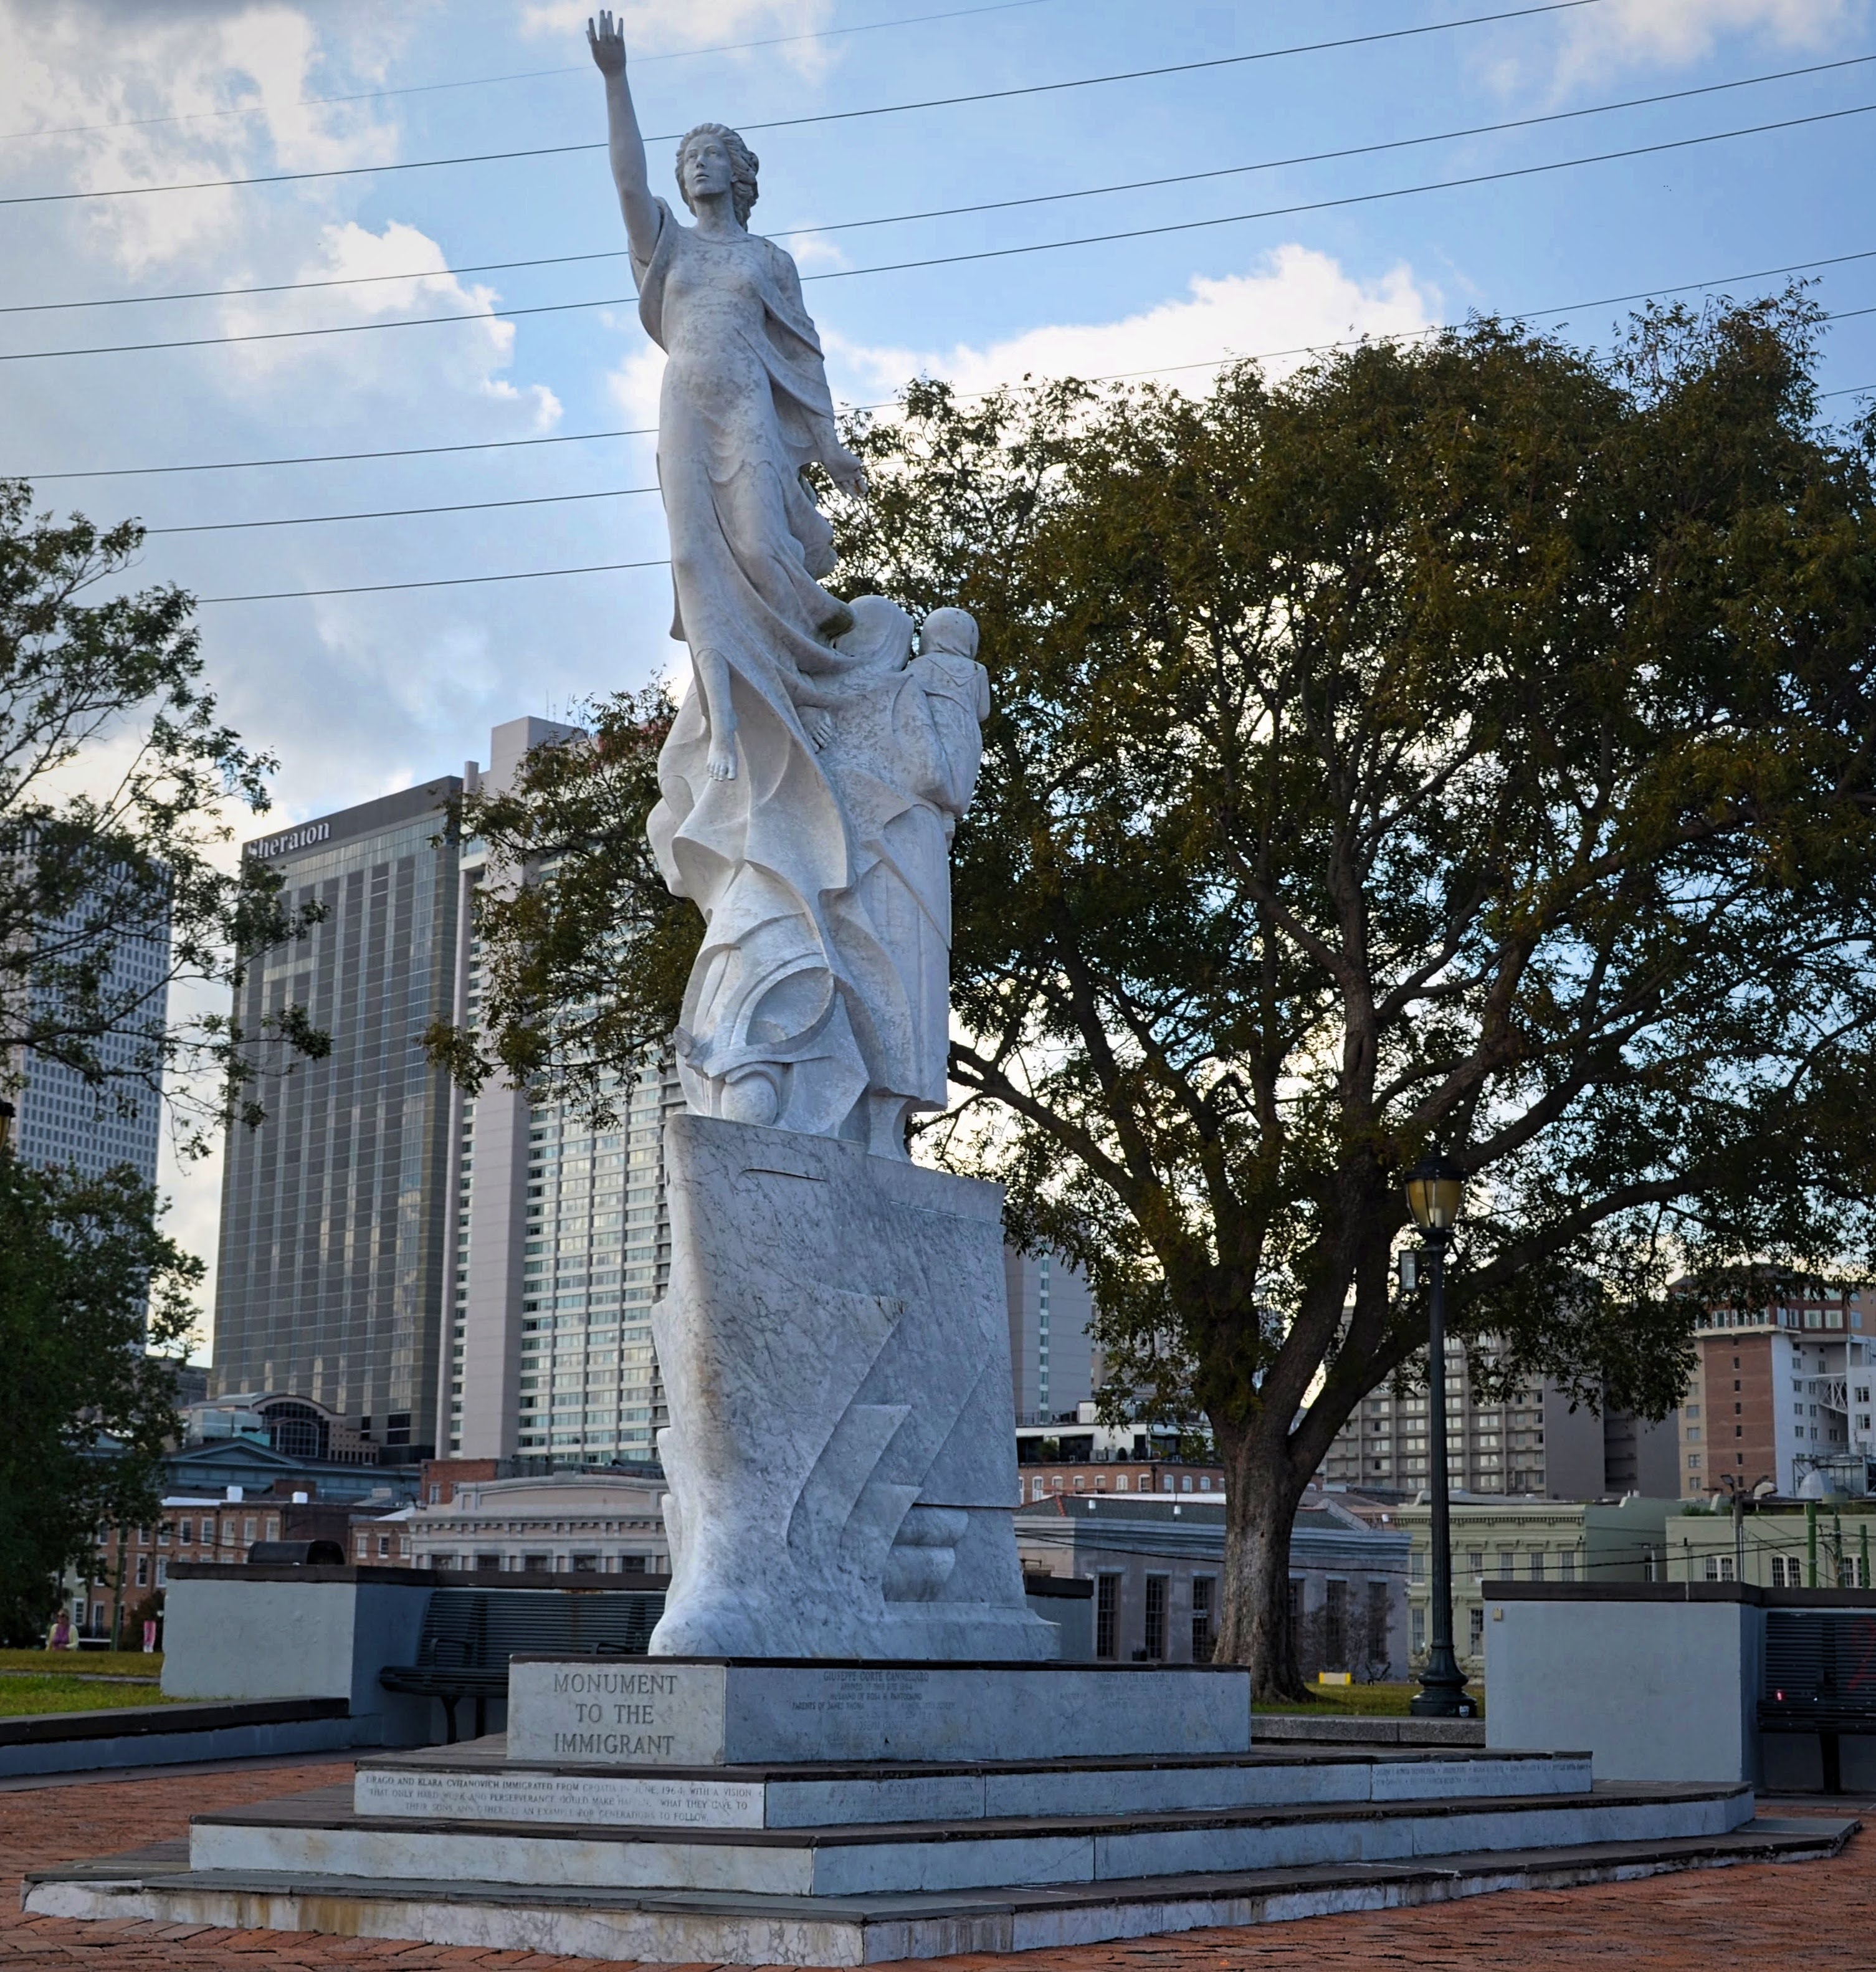 Statue of the immigrants white statue of woman with one hand in the air, new Orleans, travel blog, new orleans Louisiana, NOLA, the big east, new Orleans photography, Atlanta photographer, new Orleans travel, new Orleans travel blog, traveling blog, immigrants, new Orleans statues, new Orleans monuments, 